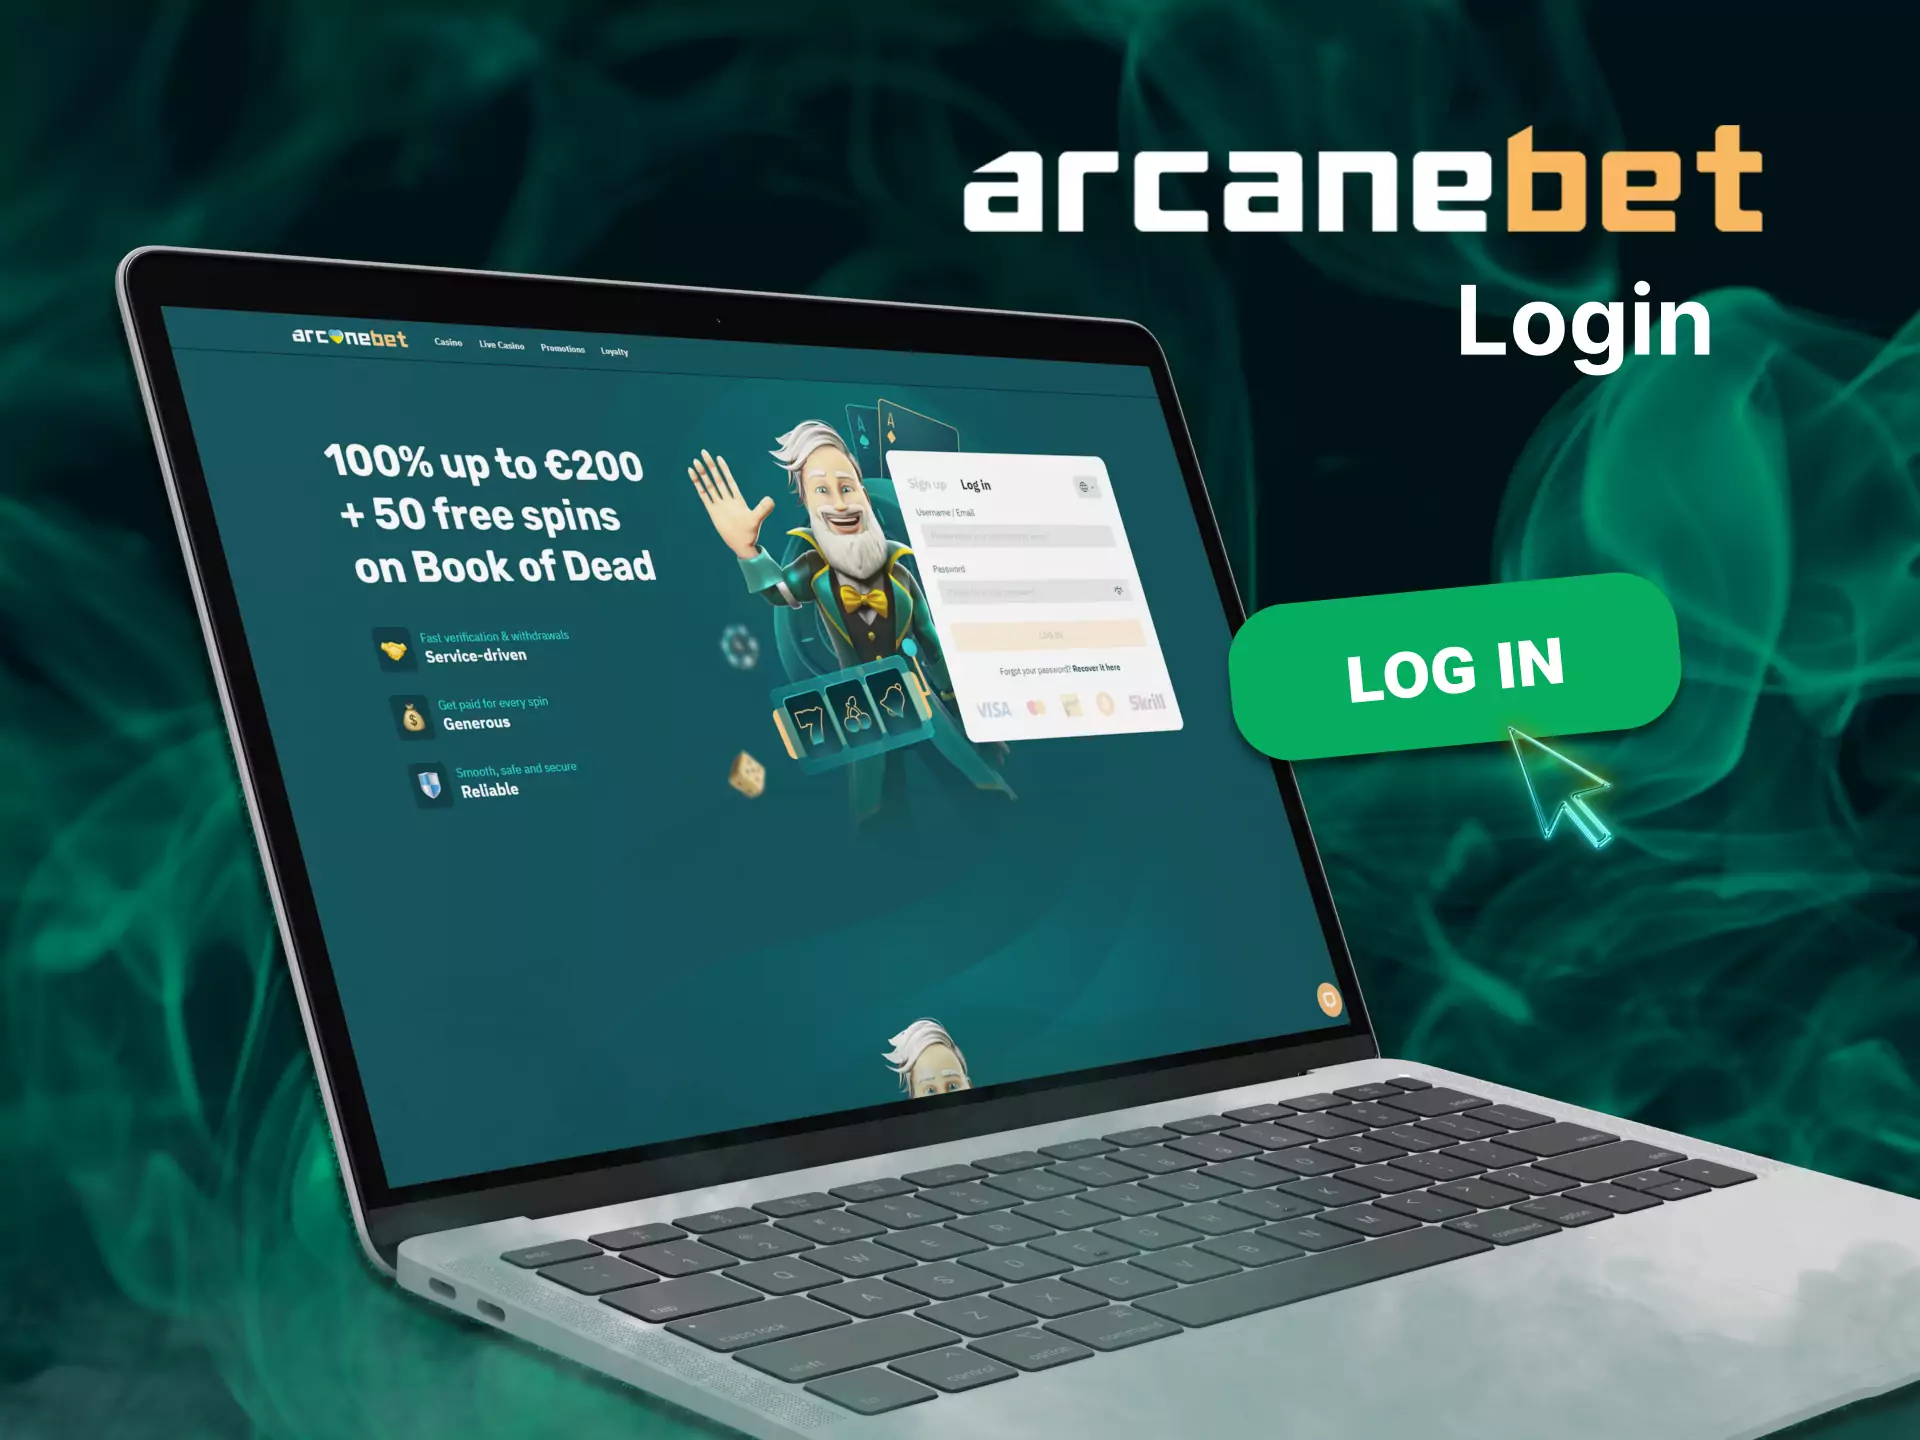 Log in to the Arcanebet account and play with pleasure.